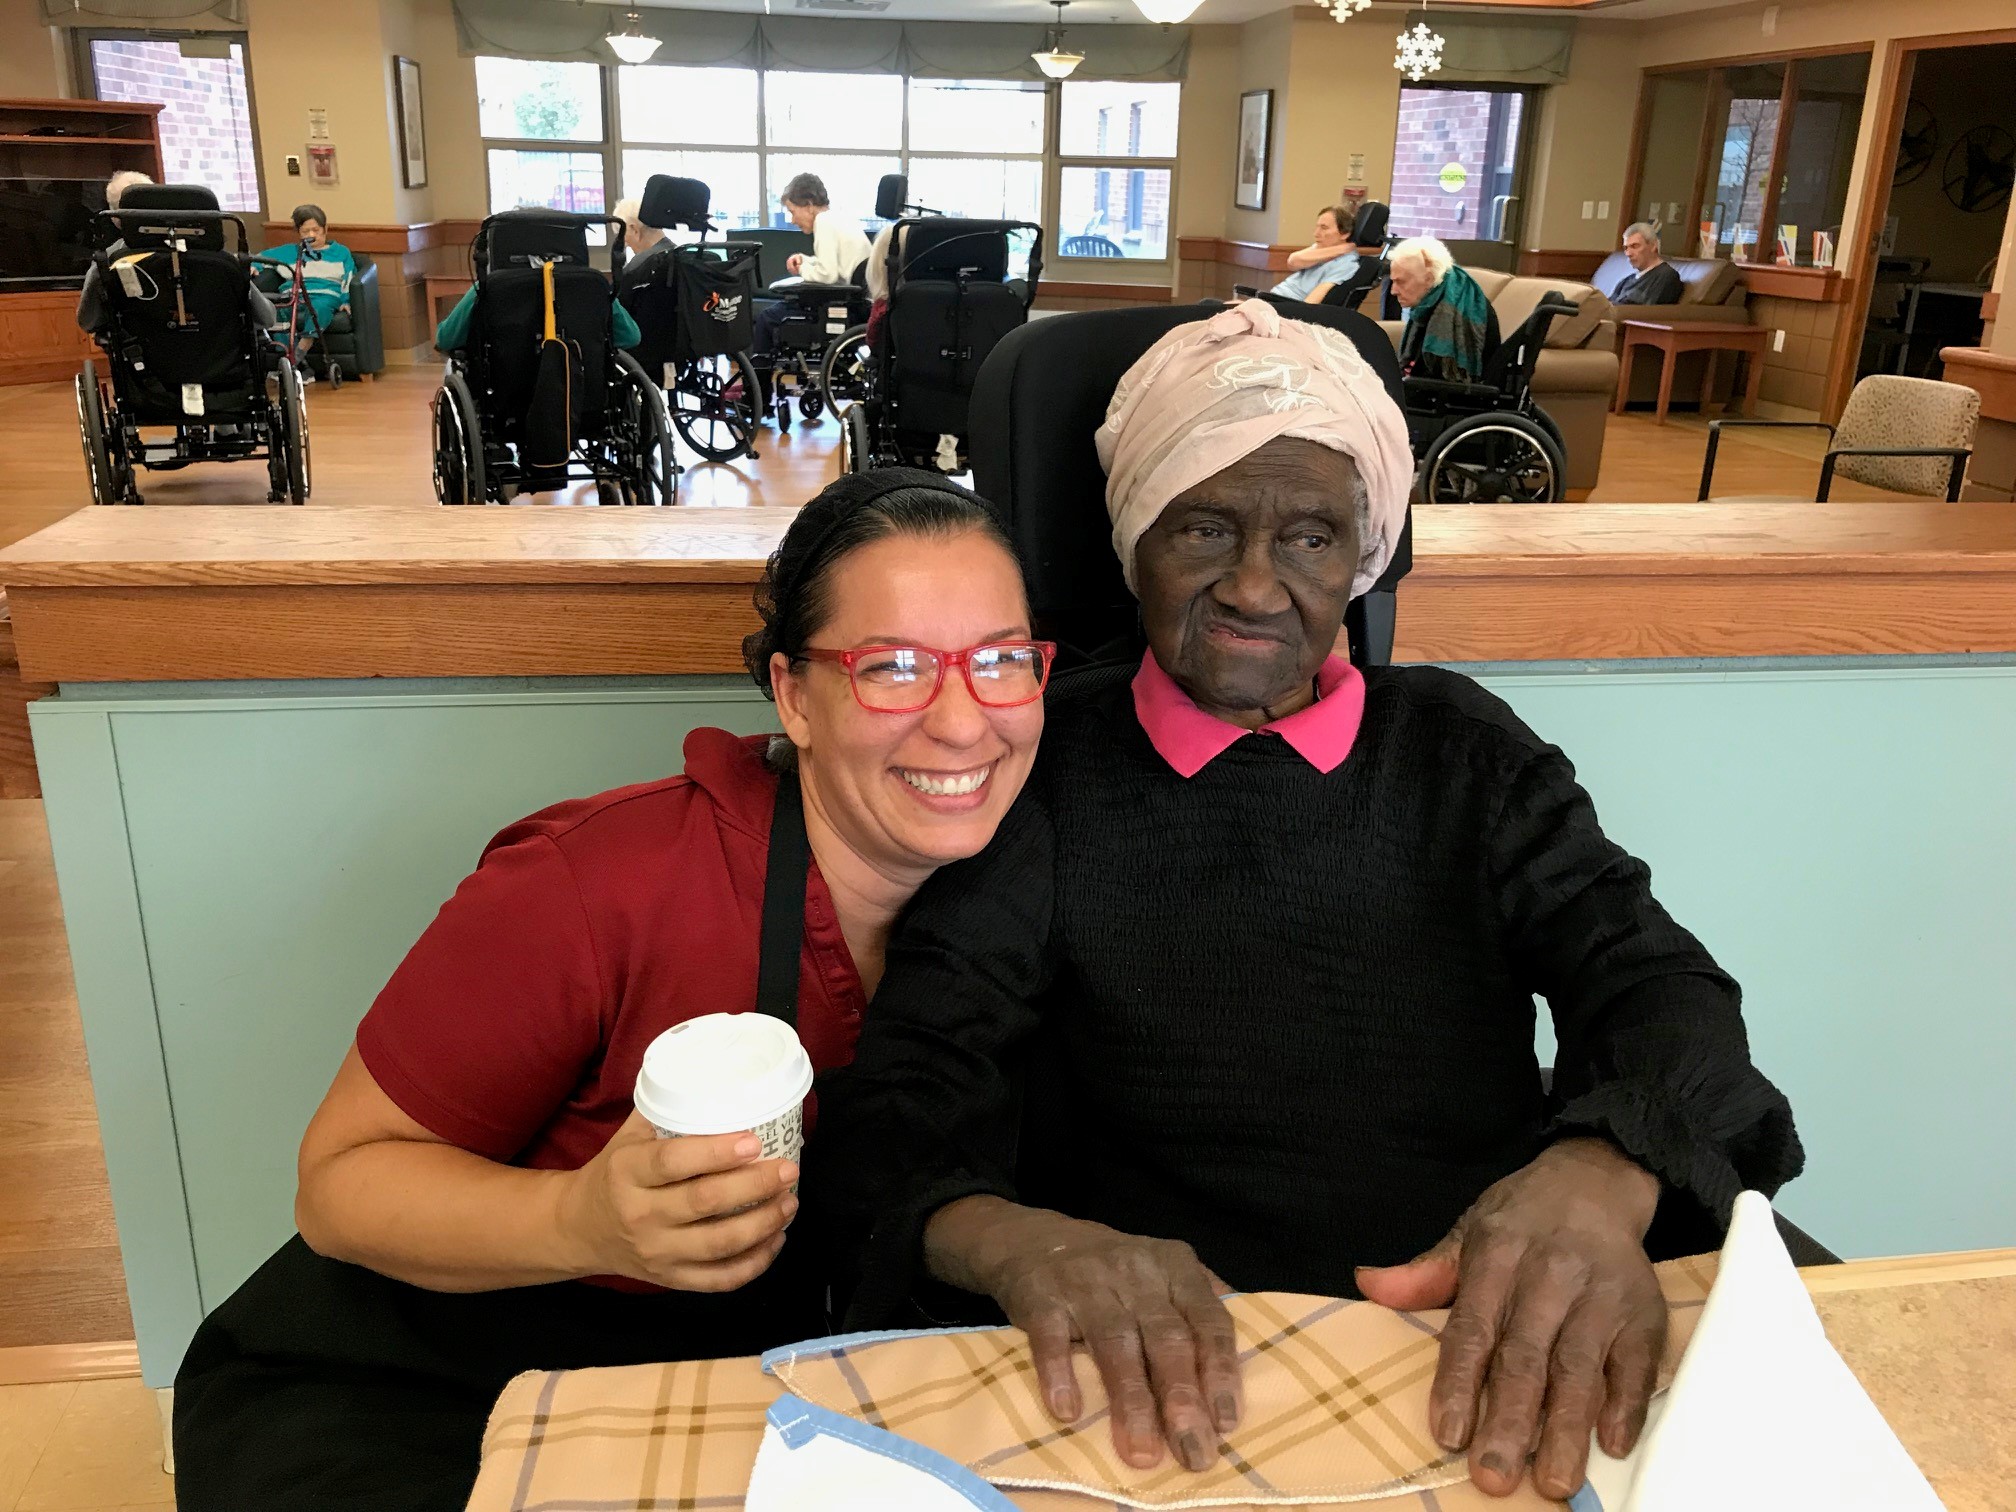 As a dietary aide, Chantal was able to develop more  meaningful connections with residents when a dishwasher in the neighbourhood created efficiencies. Albertina is just one of  many residents Chantal enjoys connecting with at St. Clair. 